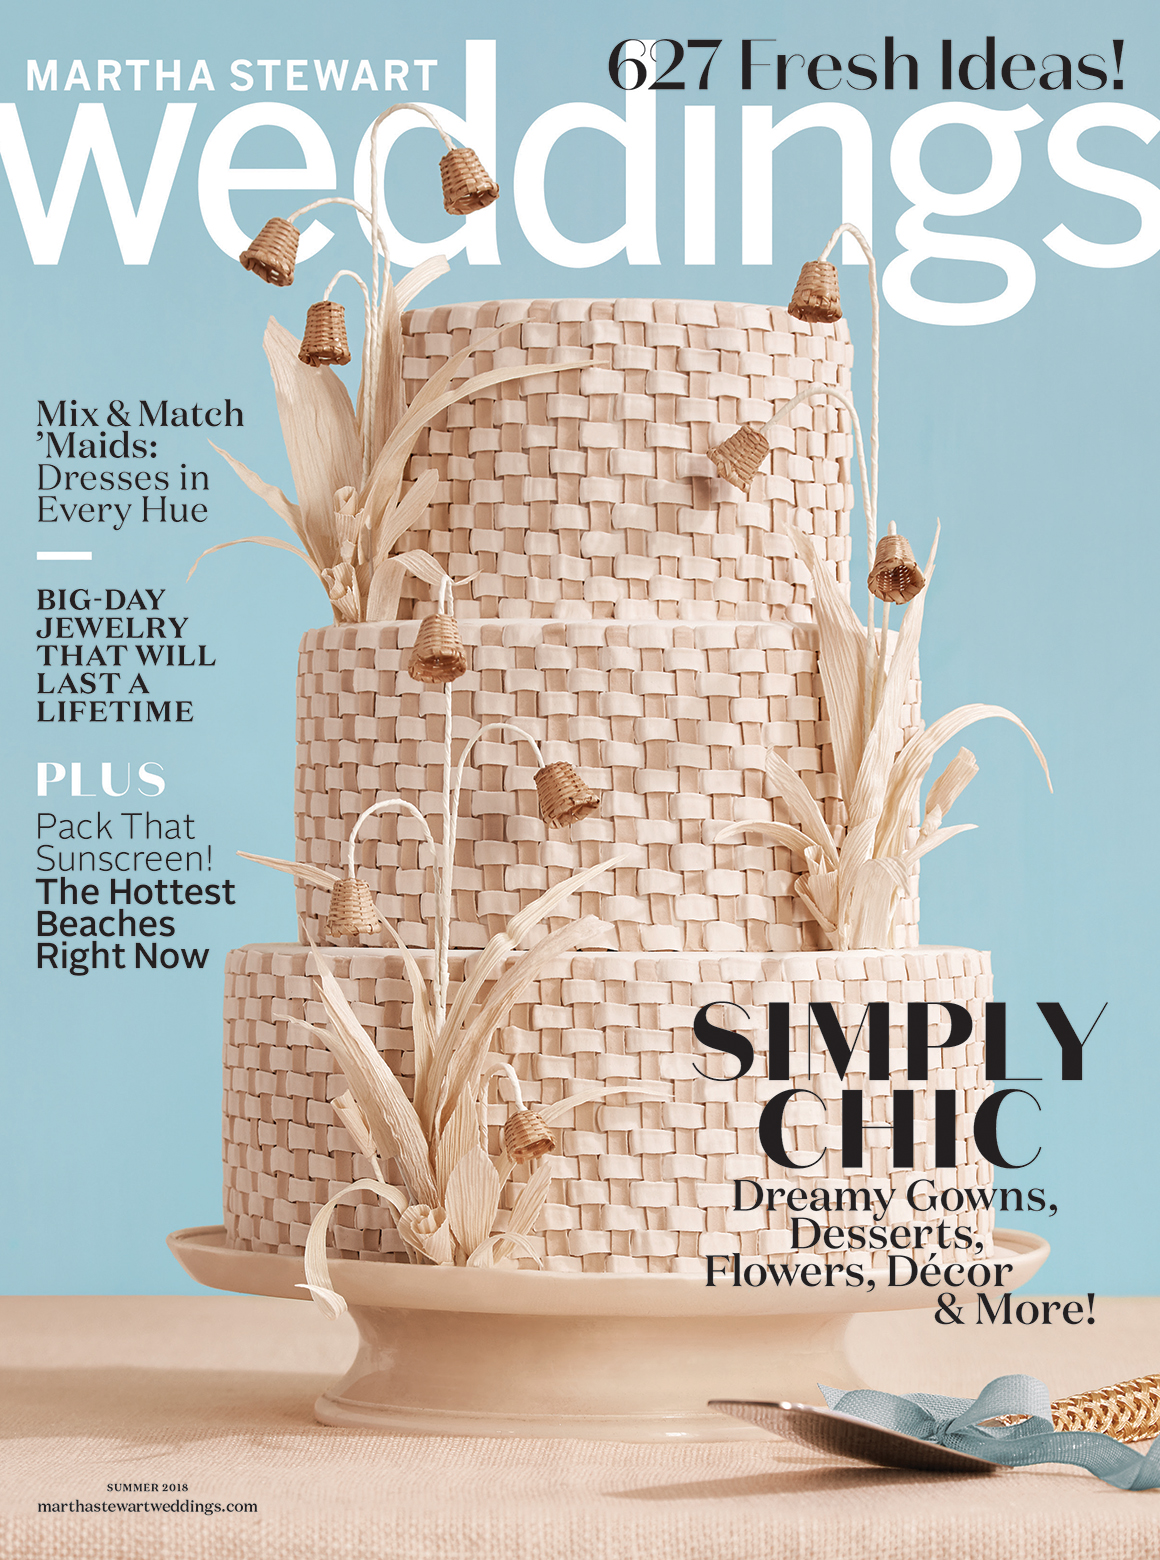 Martha Steward Weddings Magazine from summer 2018 titled "Simply Chic! Dreamy gowns, Desserts, Flowers, Decor, and more!" The cover features a three tiered wedding cake thats woven from a light wood straw material with tiny basket flowers and straw leaves on a blue background.